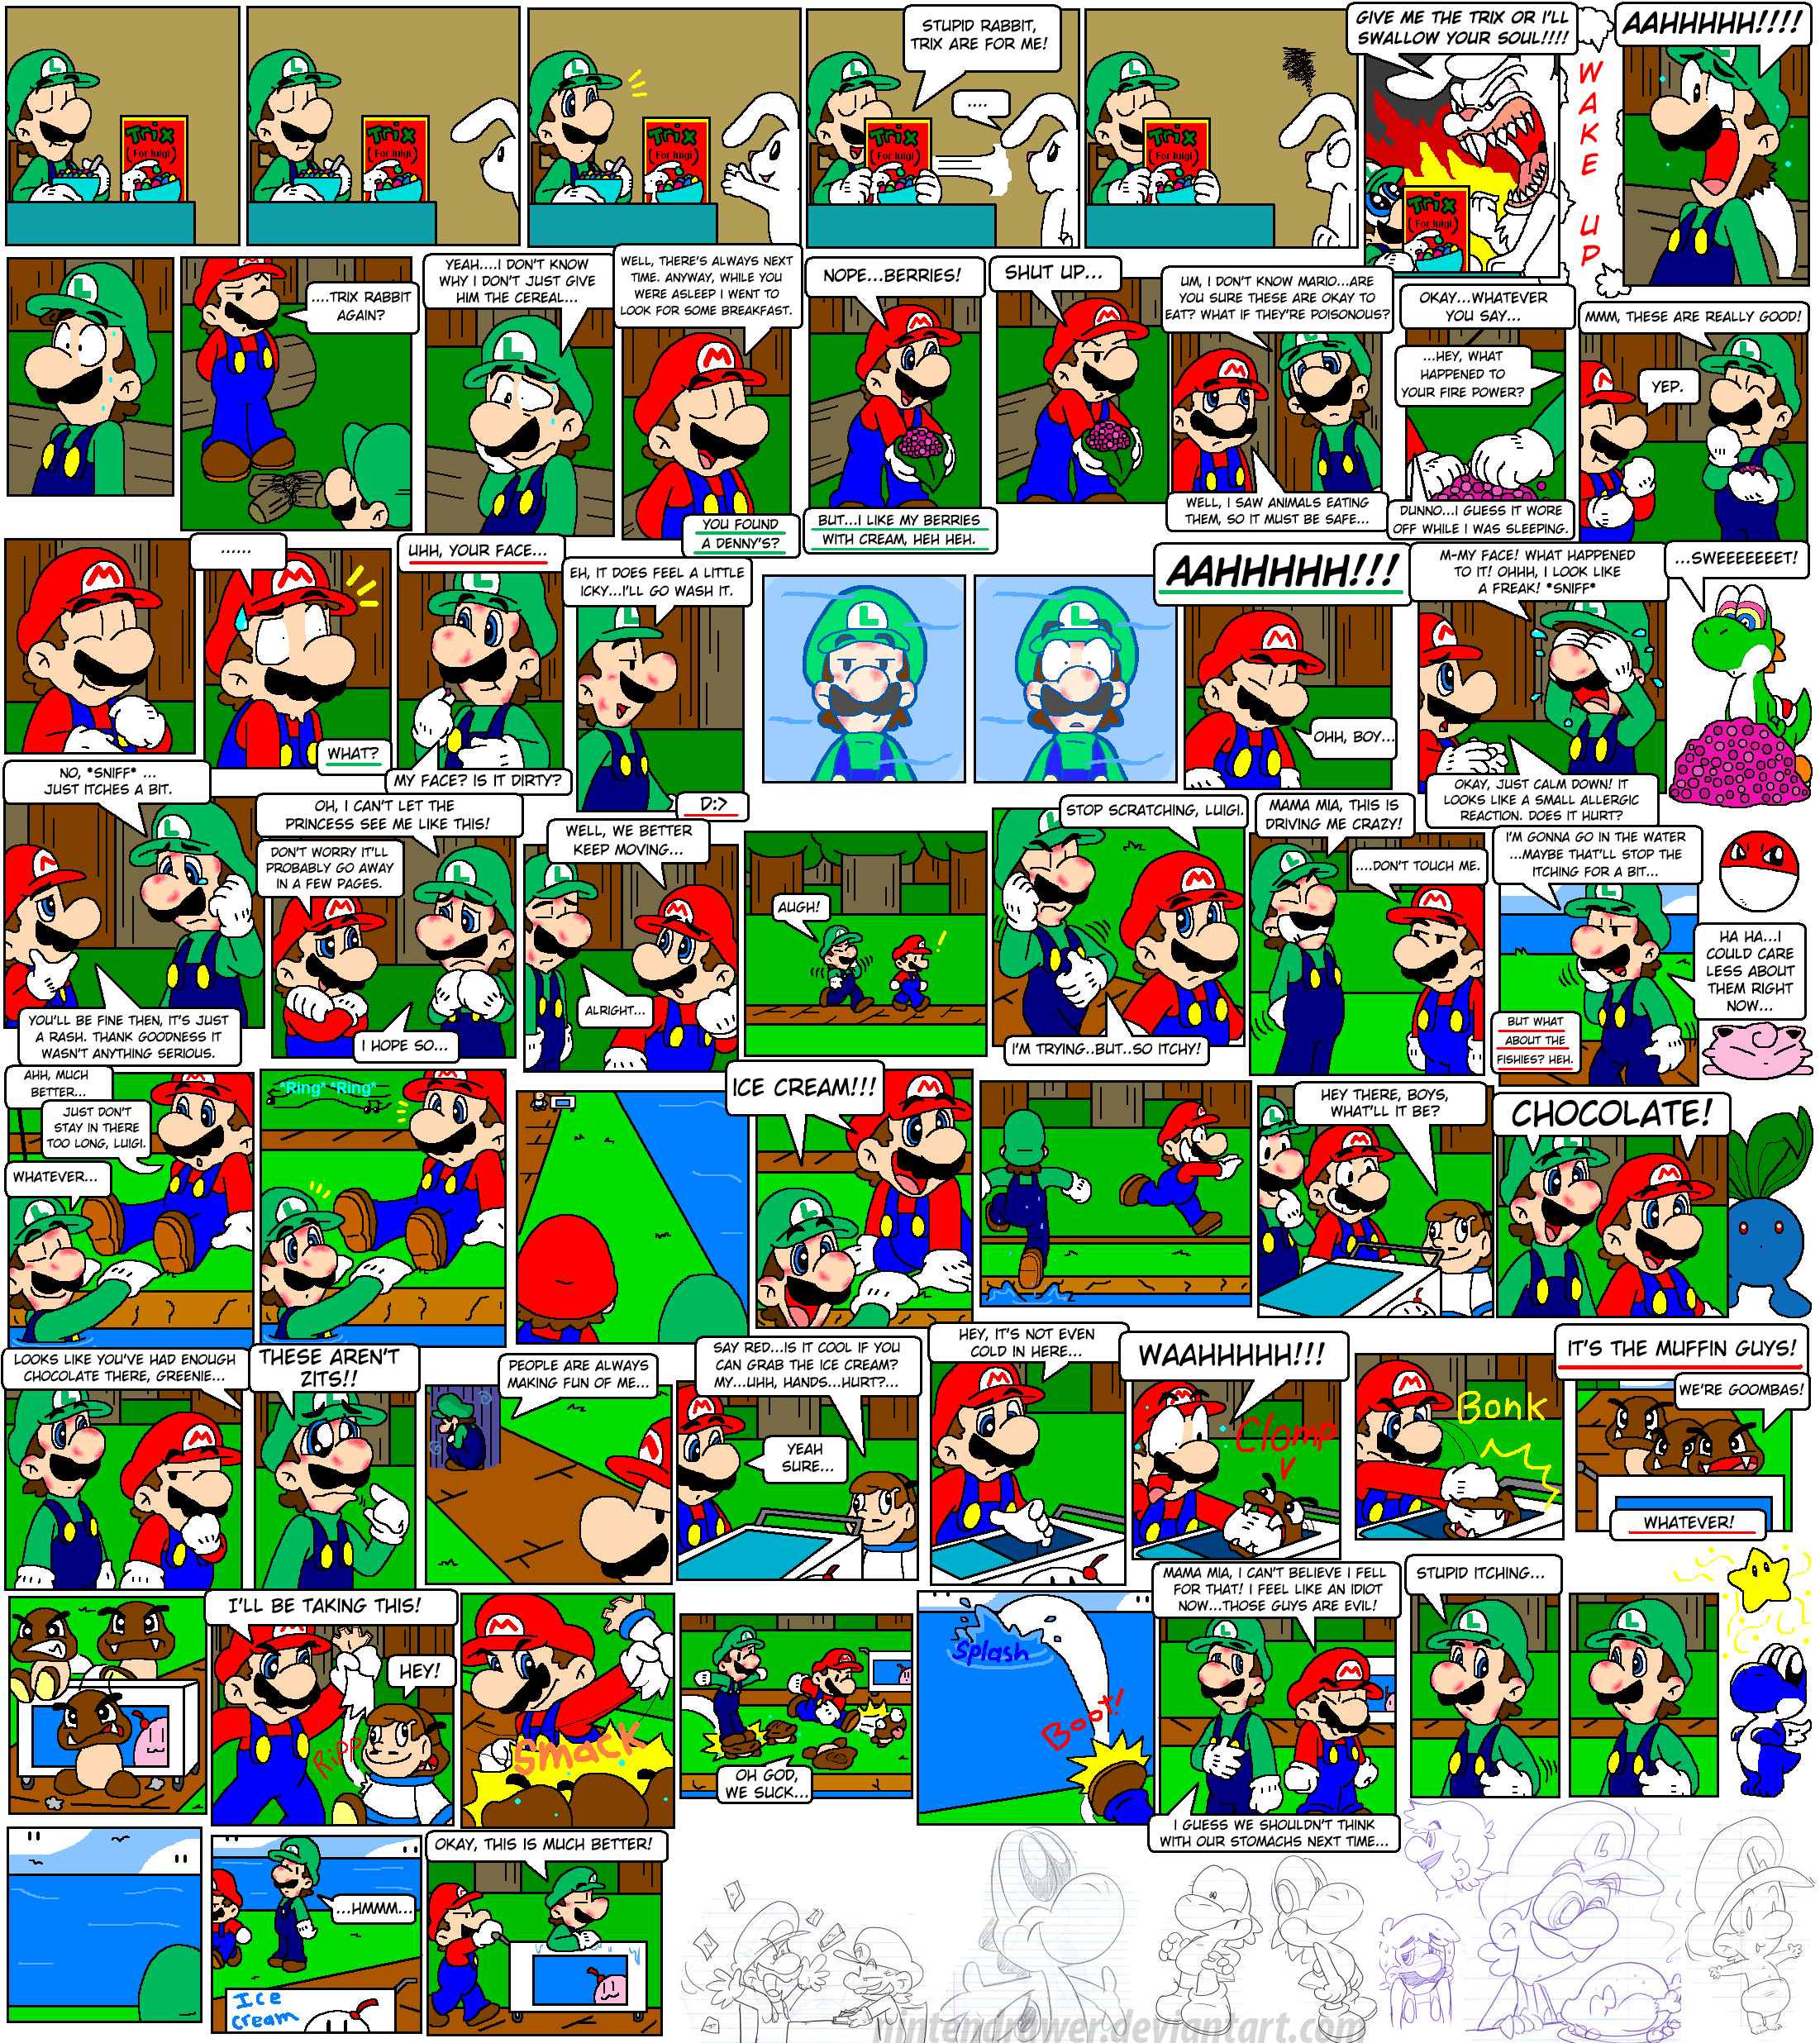 Super Mario Bros Page 1 by Nintendrawer on DeviantArt